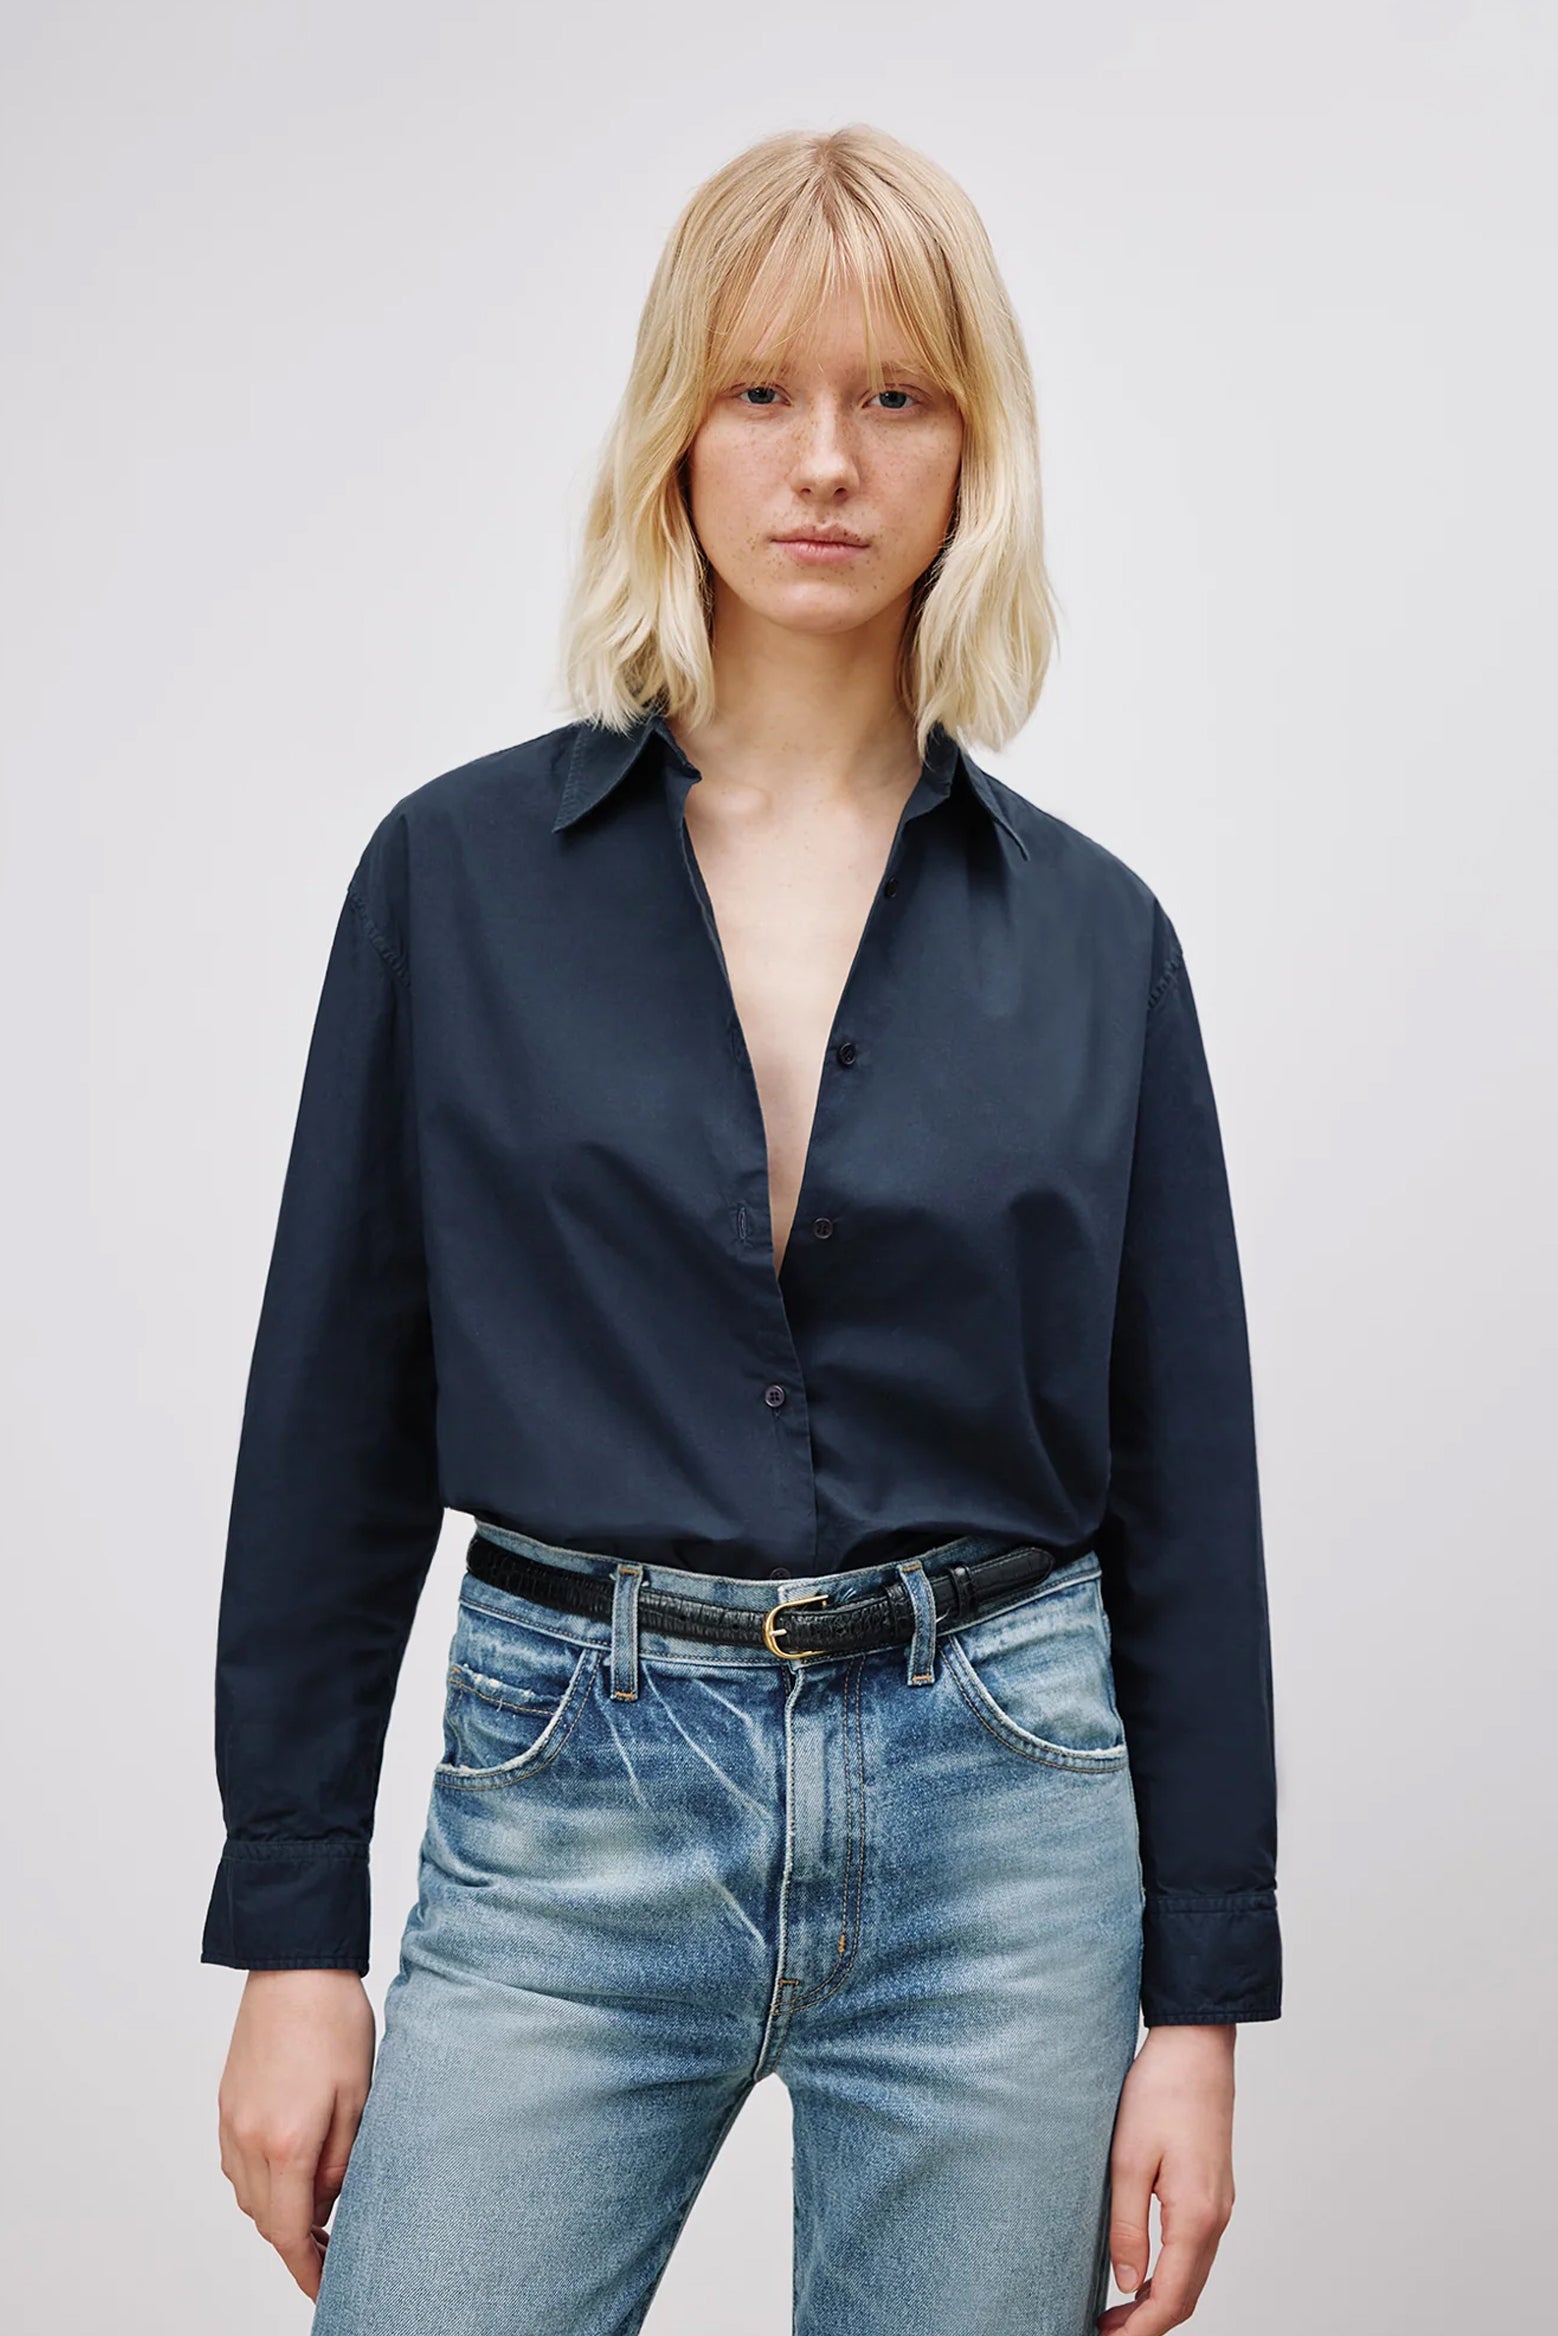 Nili Lotan Yorke Shirt in Midnight available at The New Trend Australia.